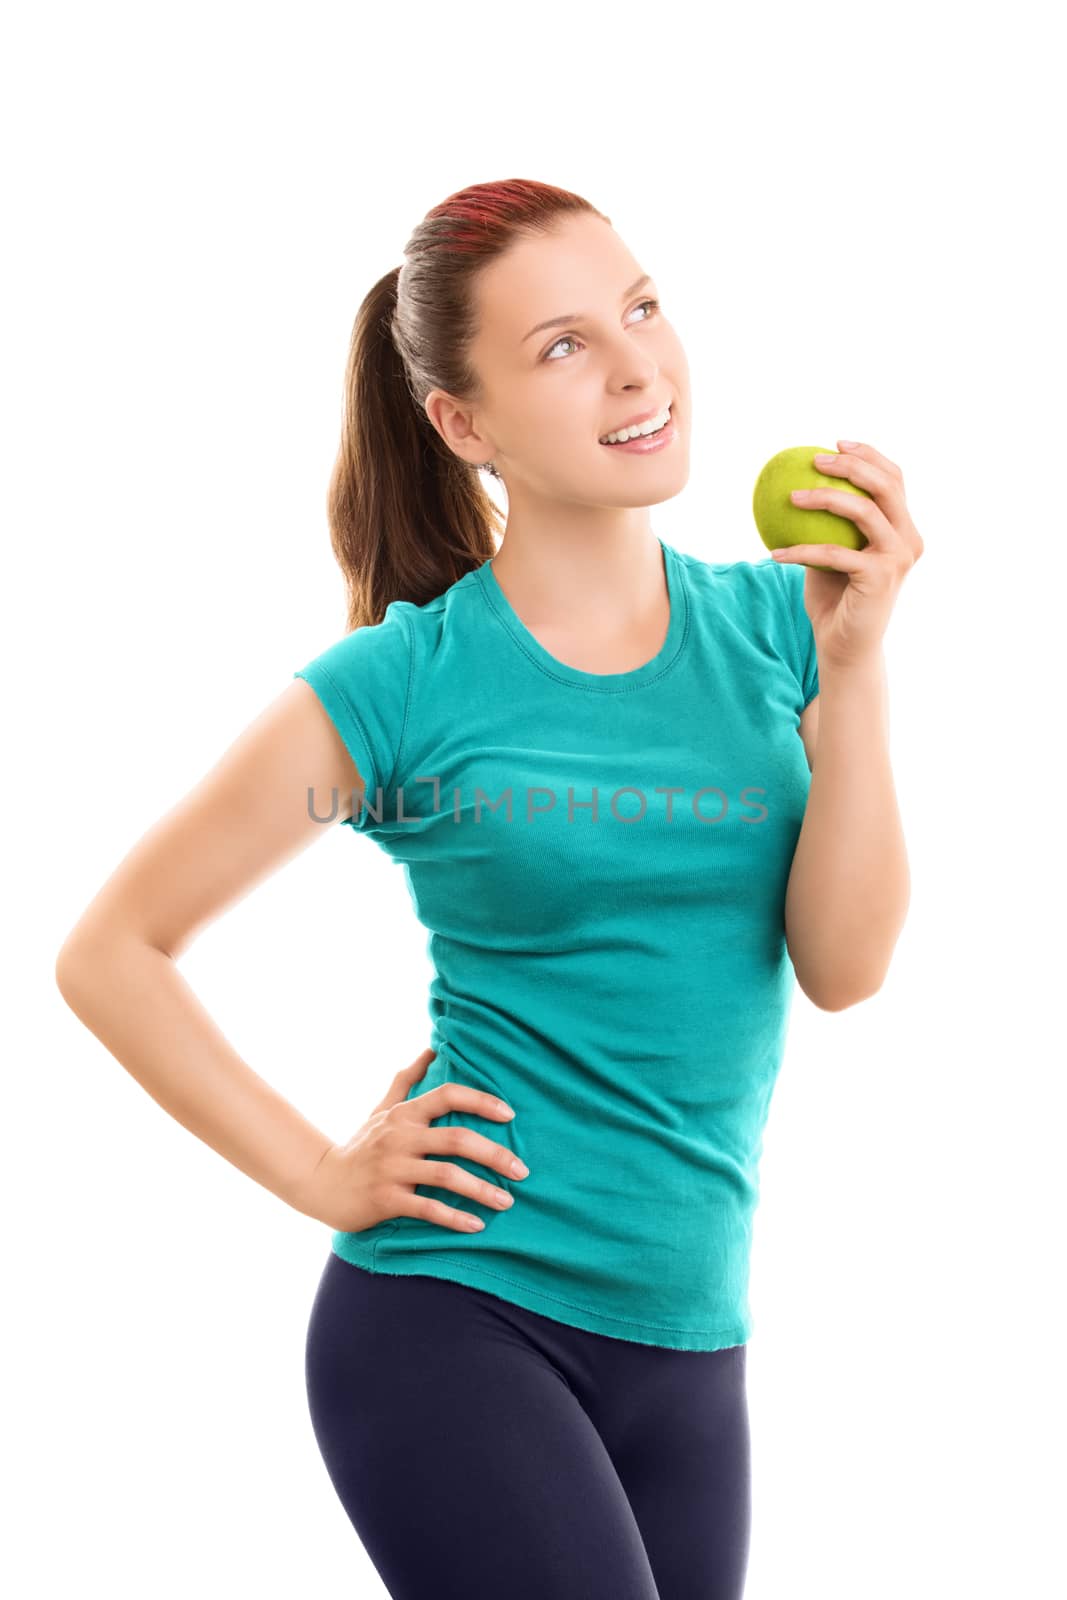 Smiling young girl in fitness clothes holding an apple by Mendelex